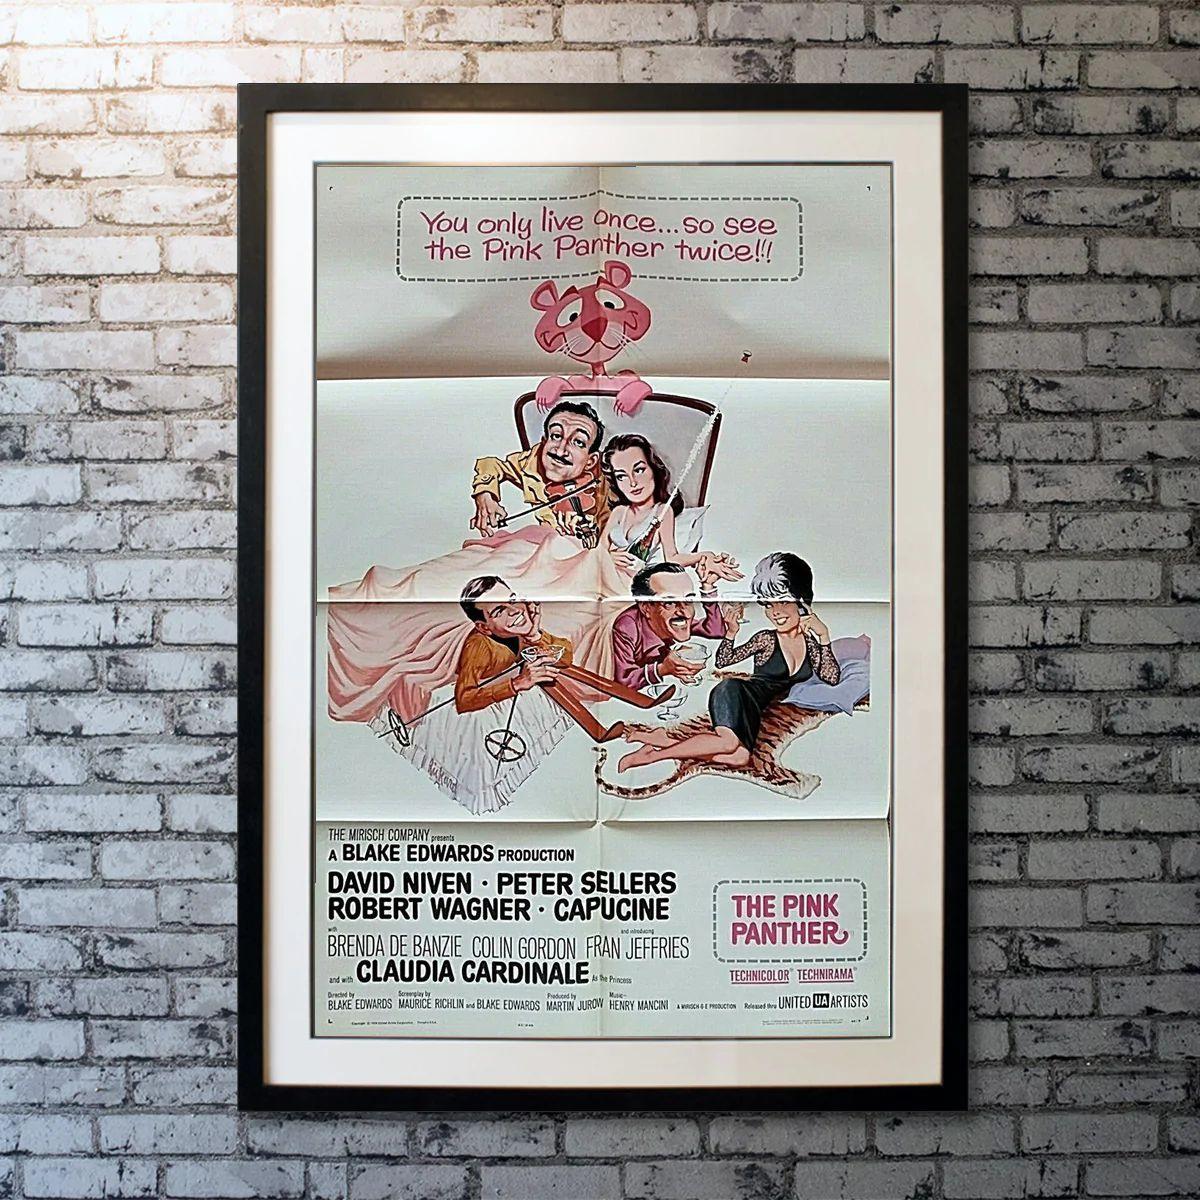 The Pink Panther, Unframed Poster, 1963

Original One Sheet (27 x 41 inches). The bumbling Inspector Clouseau travels to Rome to catch a notorious jewel thief known as 